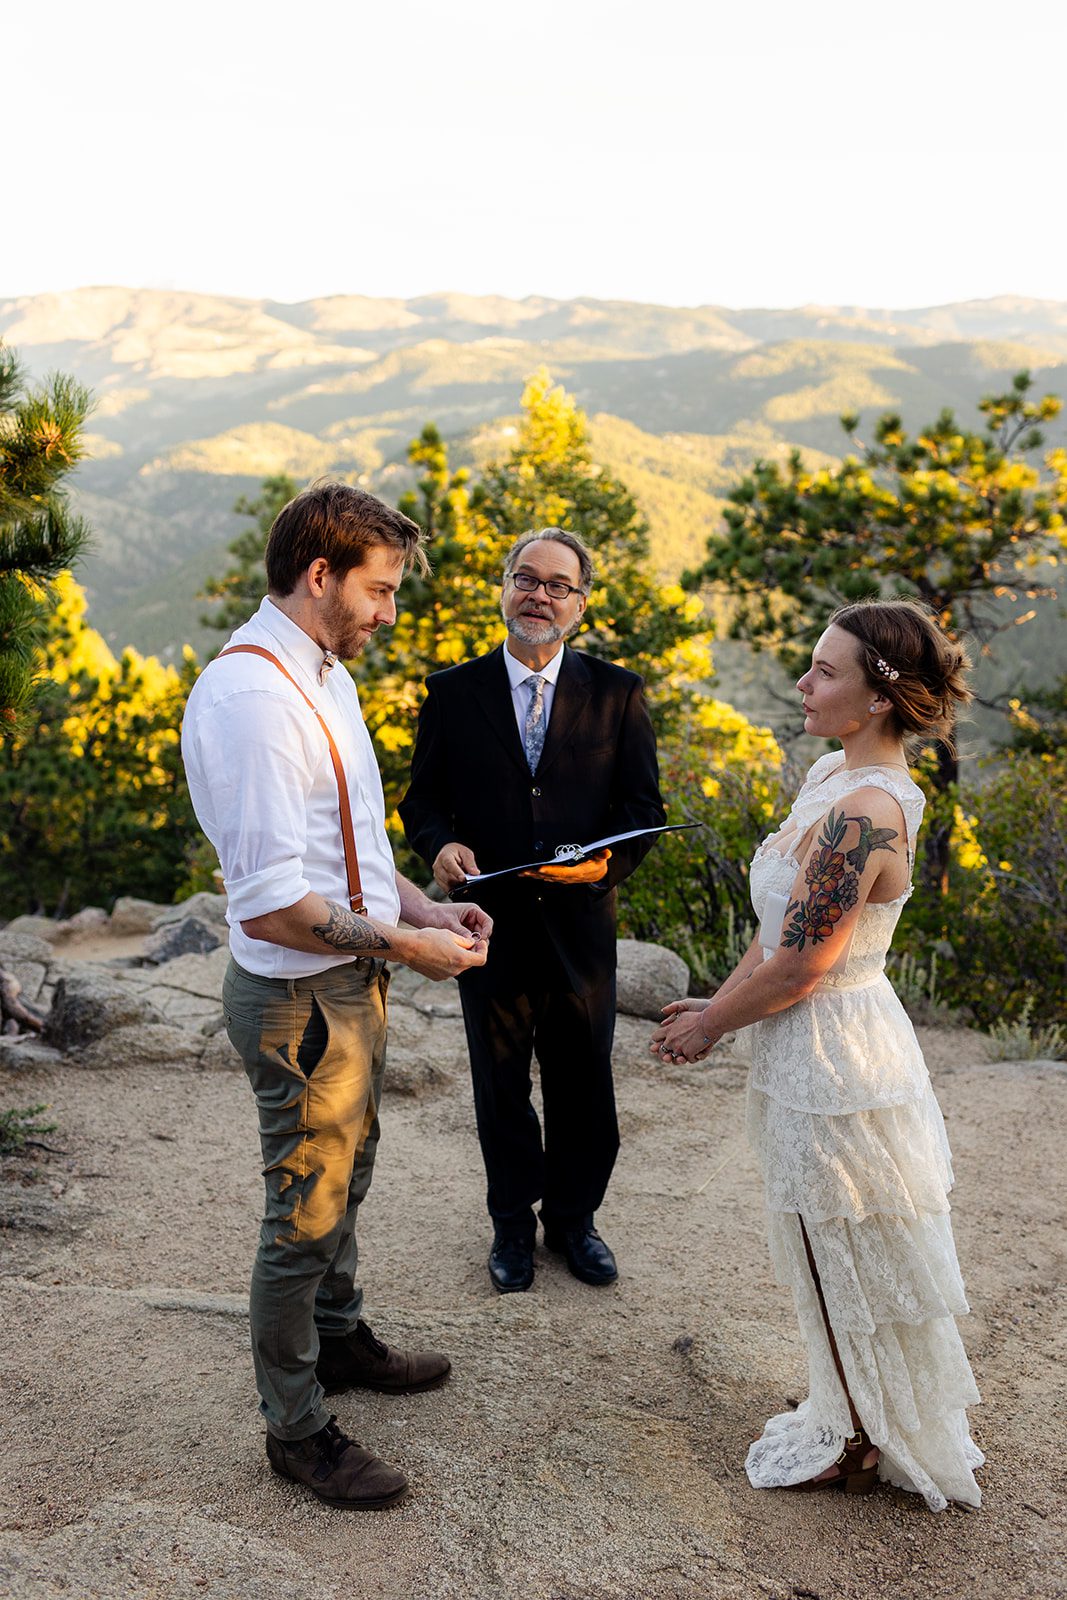 Groom with ring for his bride during elopement ceremony